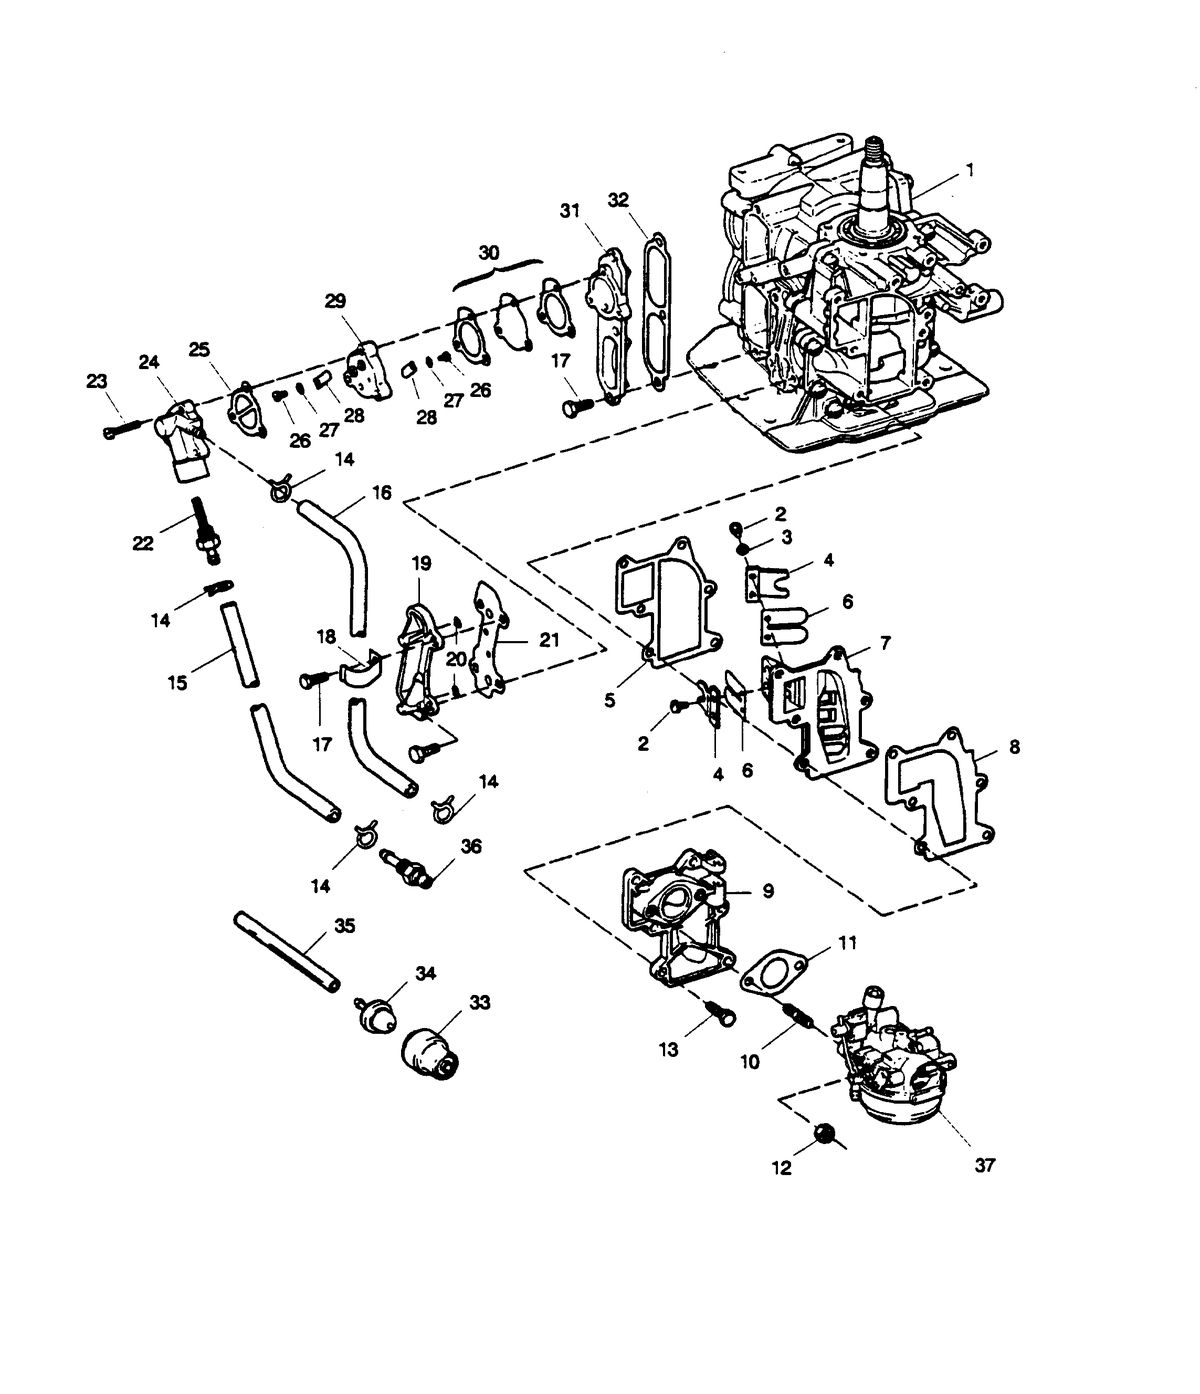 SEARS SEARS FUEL INTAKE AND RECIRCULATION SYSTEM